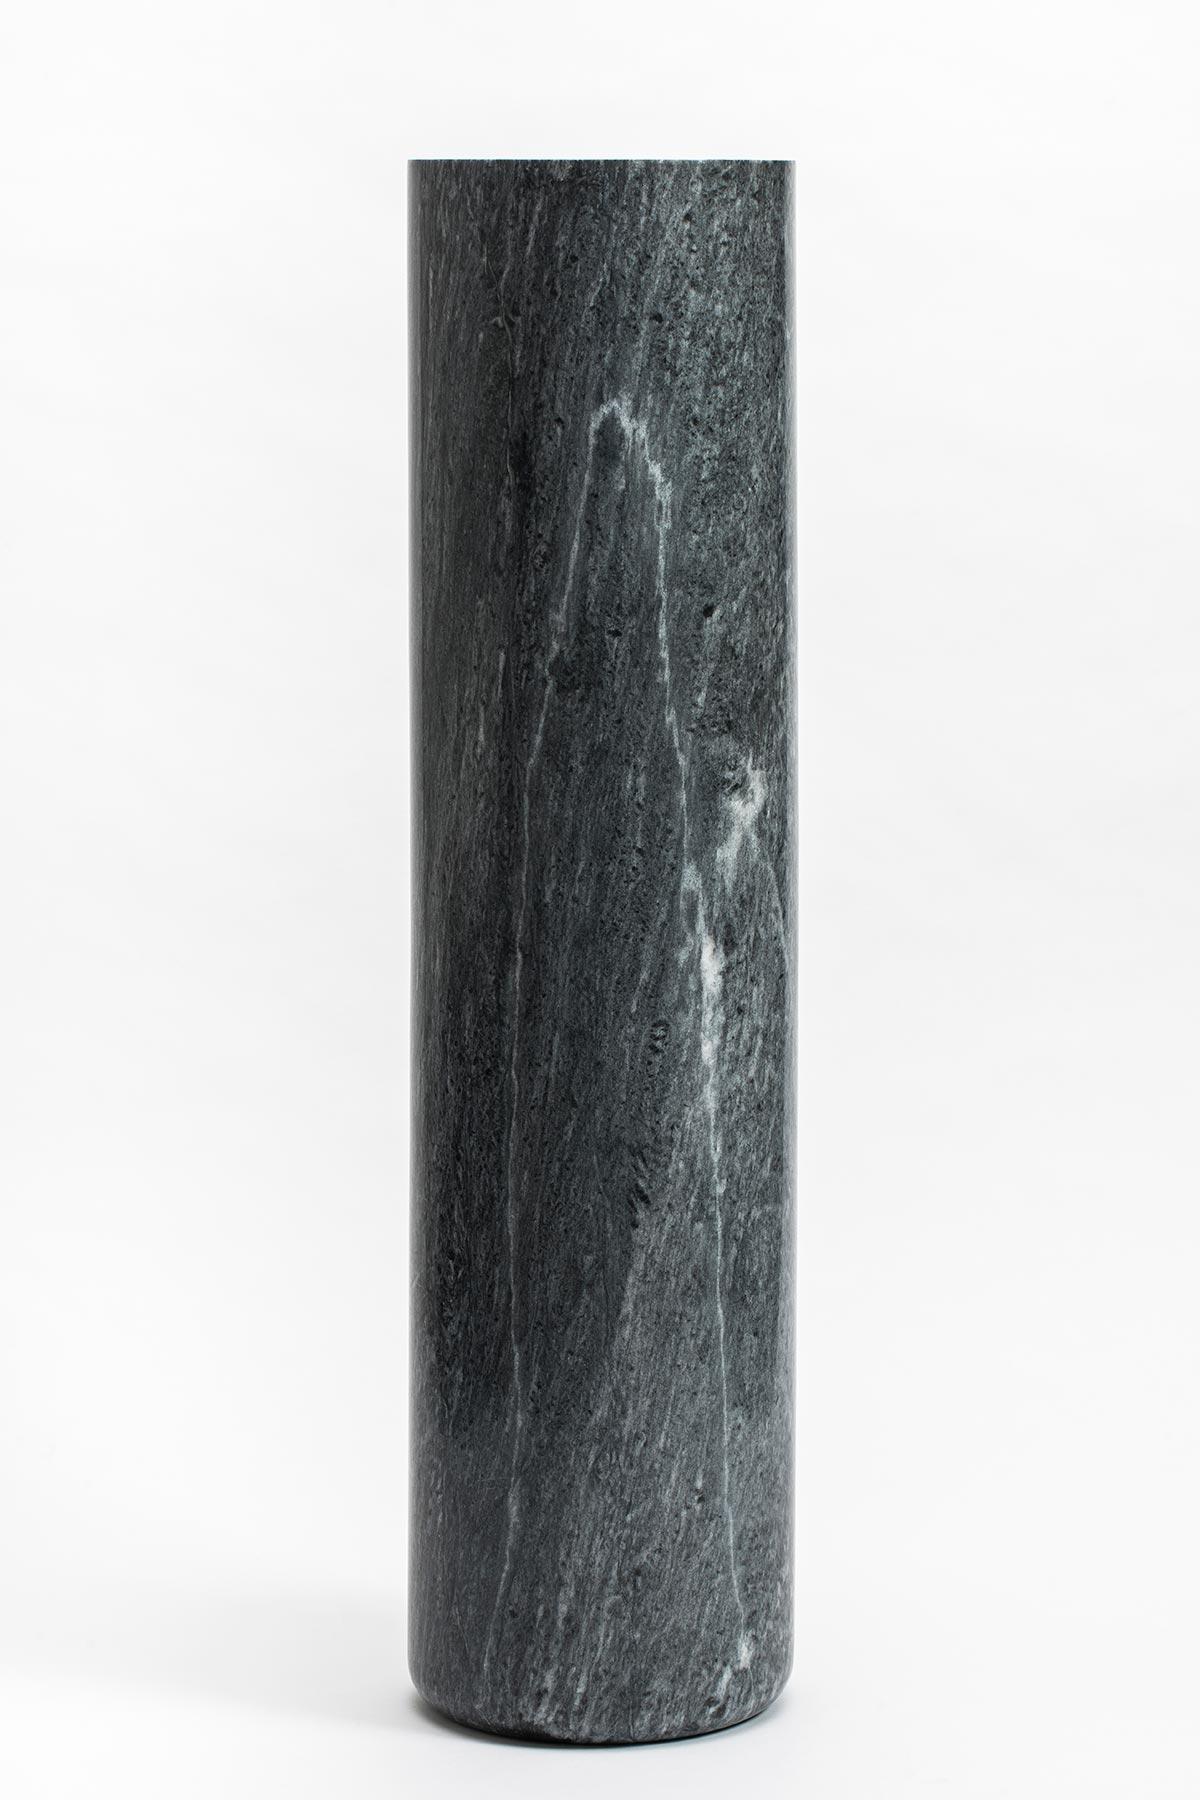 Michael Anastassiades, Forbidden fruit tall vessel, 2017, Pele de Tigre Marble, Rosa sem Veios Marble, 
The pieces of the Forbidden Fruit series explore the idea of variation between the interior and exterior of objects. These pieces are inspired